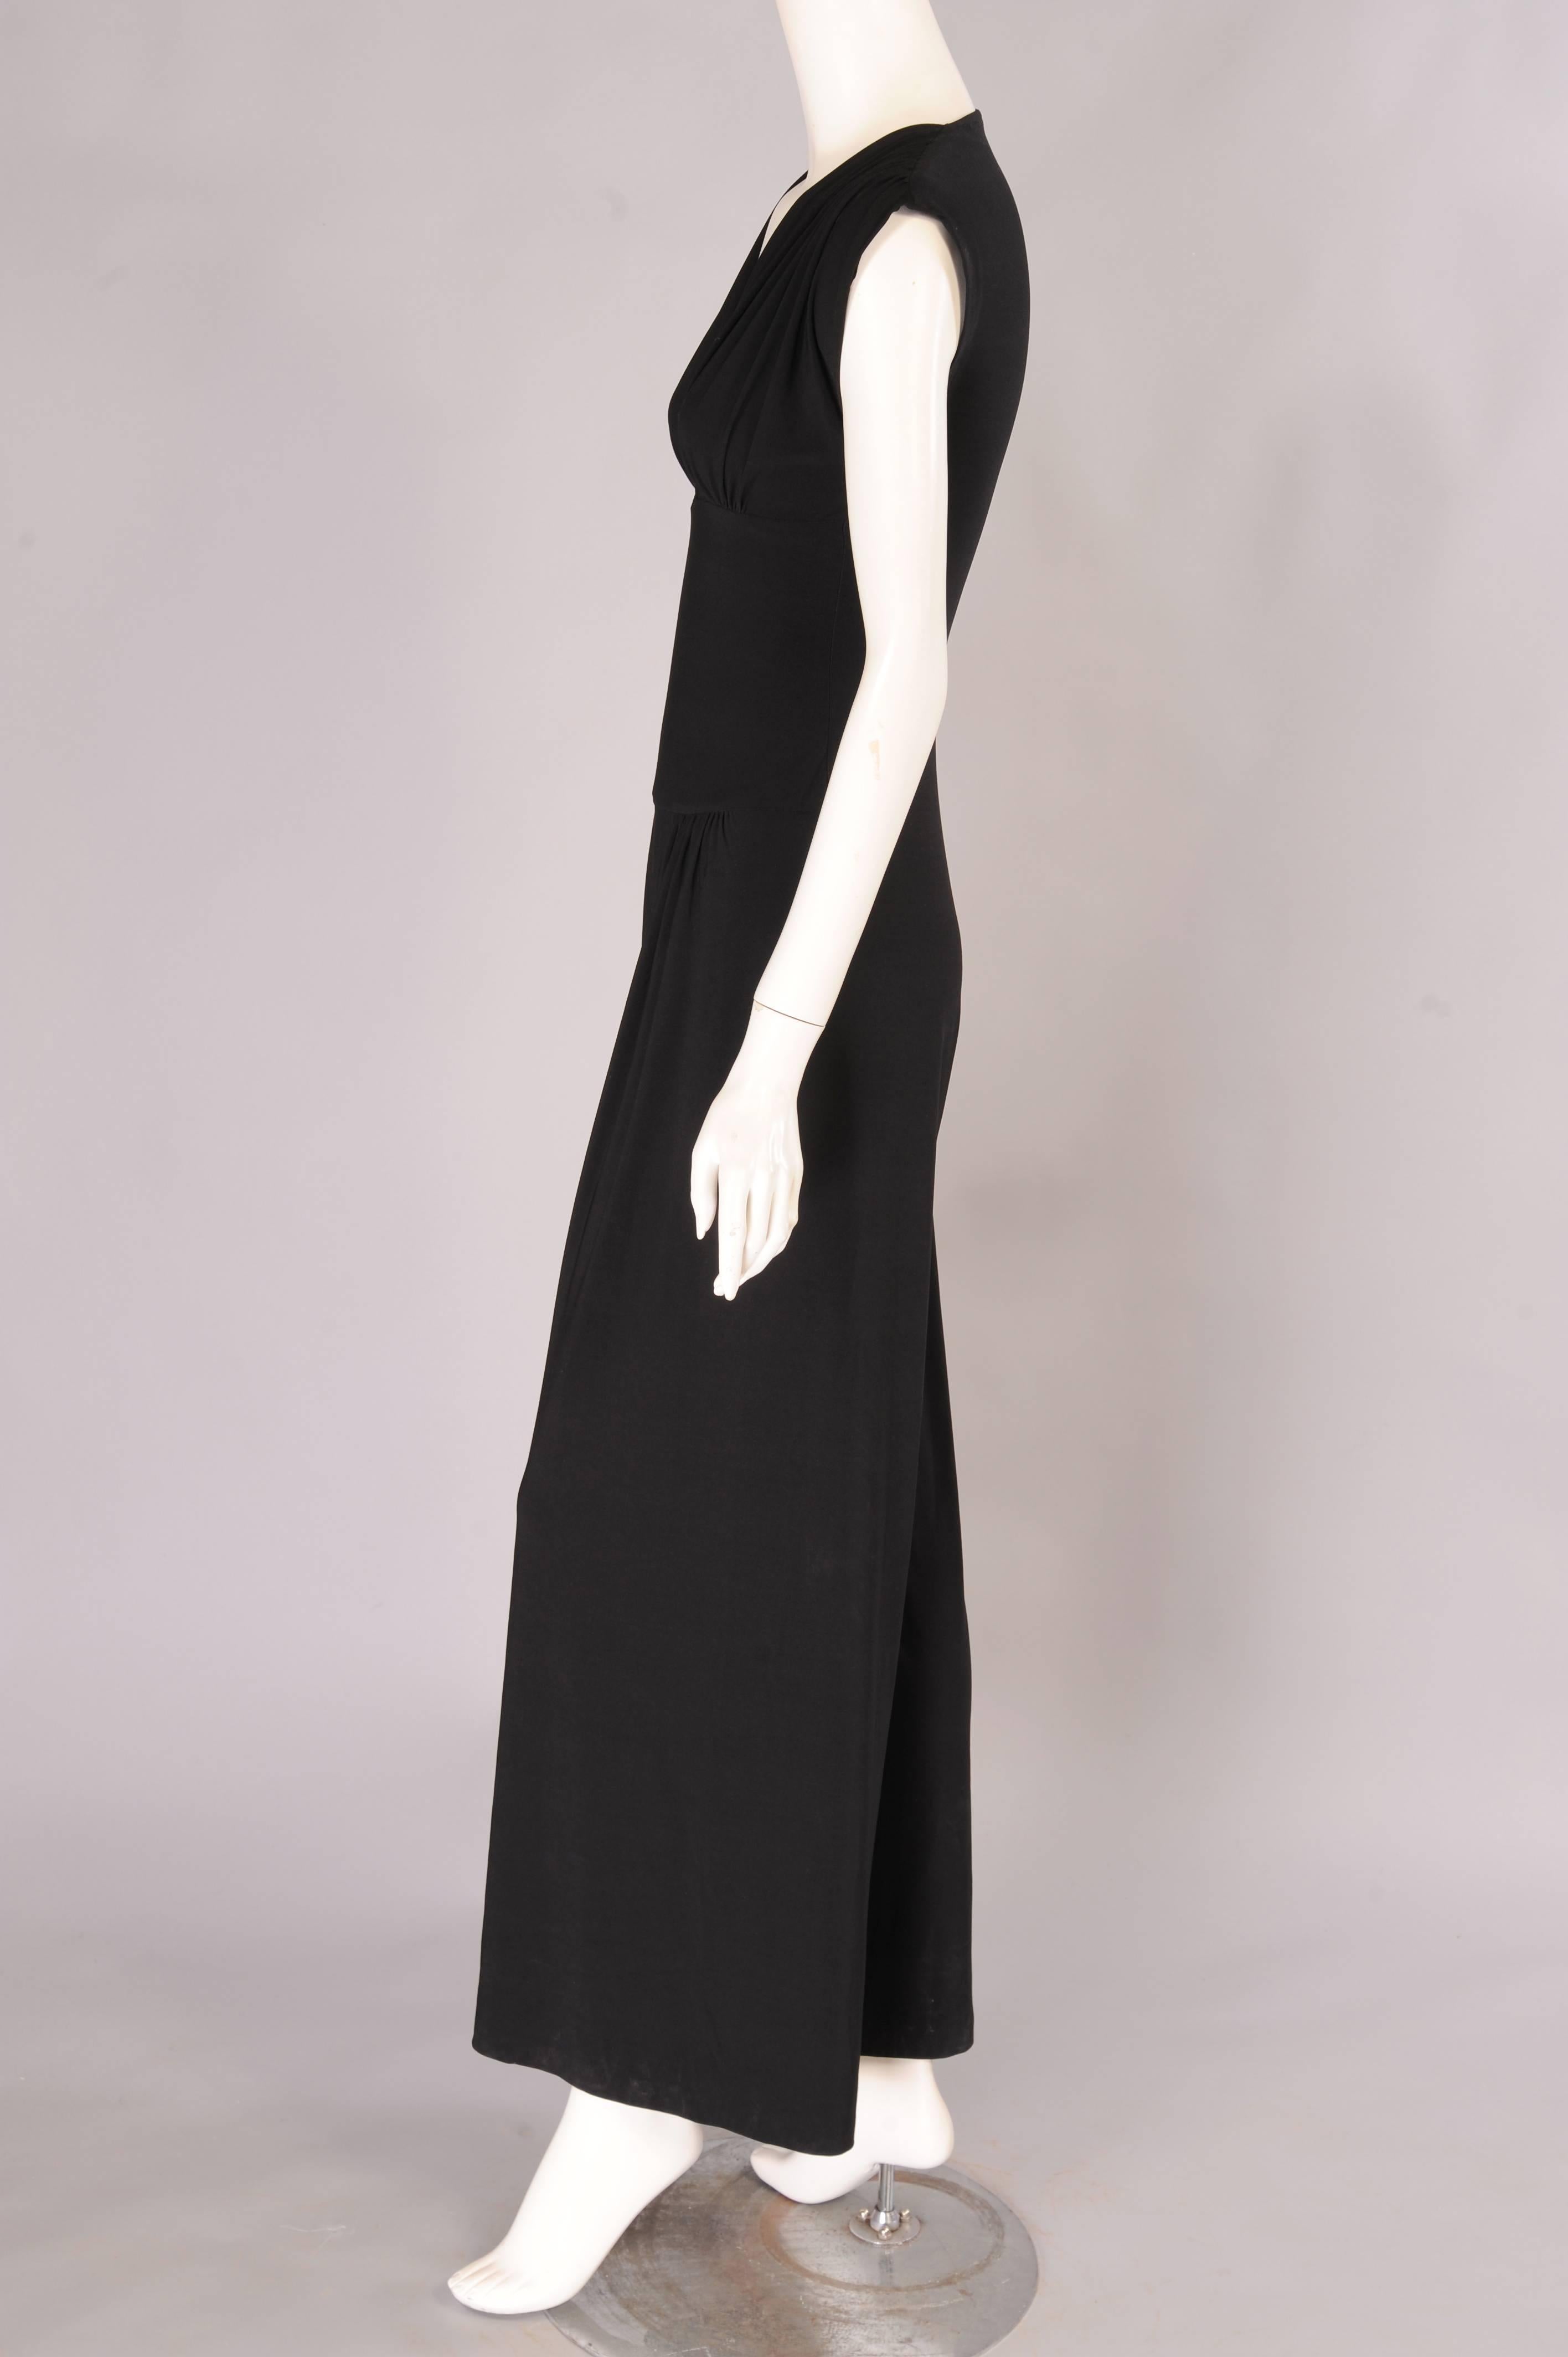 A sexy shape and a stretchy fabric make this a great jumpsuit for day or evening. The gathered top has a V neckline above a flat mid section. The pants are cut full and it just pulls on, no zippers or hooks. It is in excellent condition and marked a